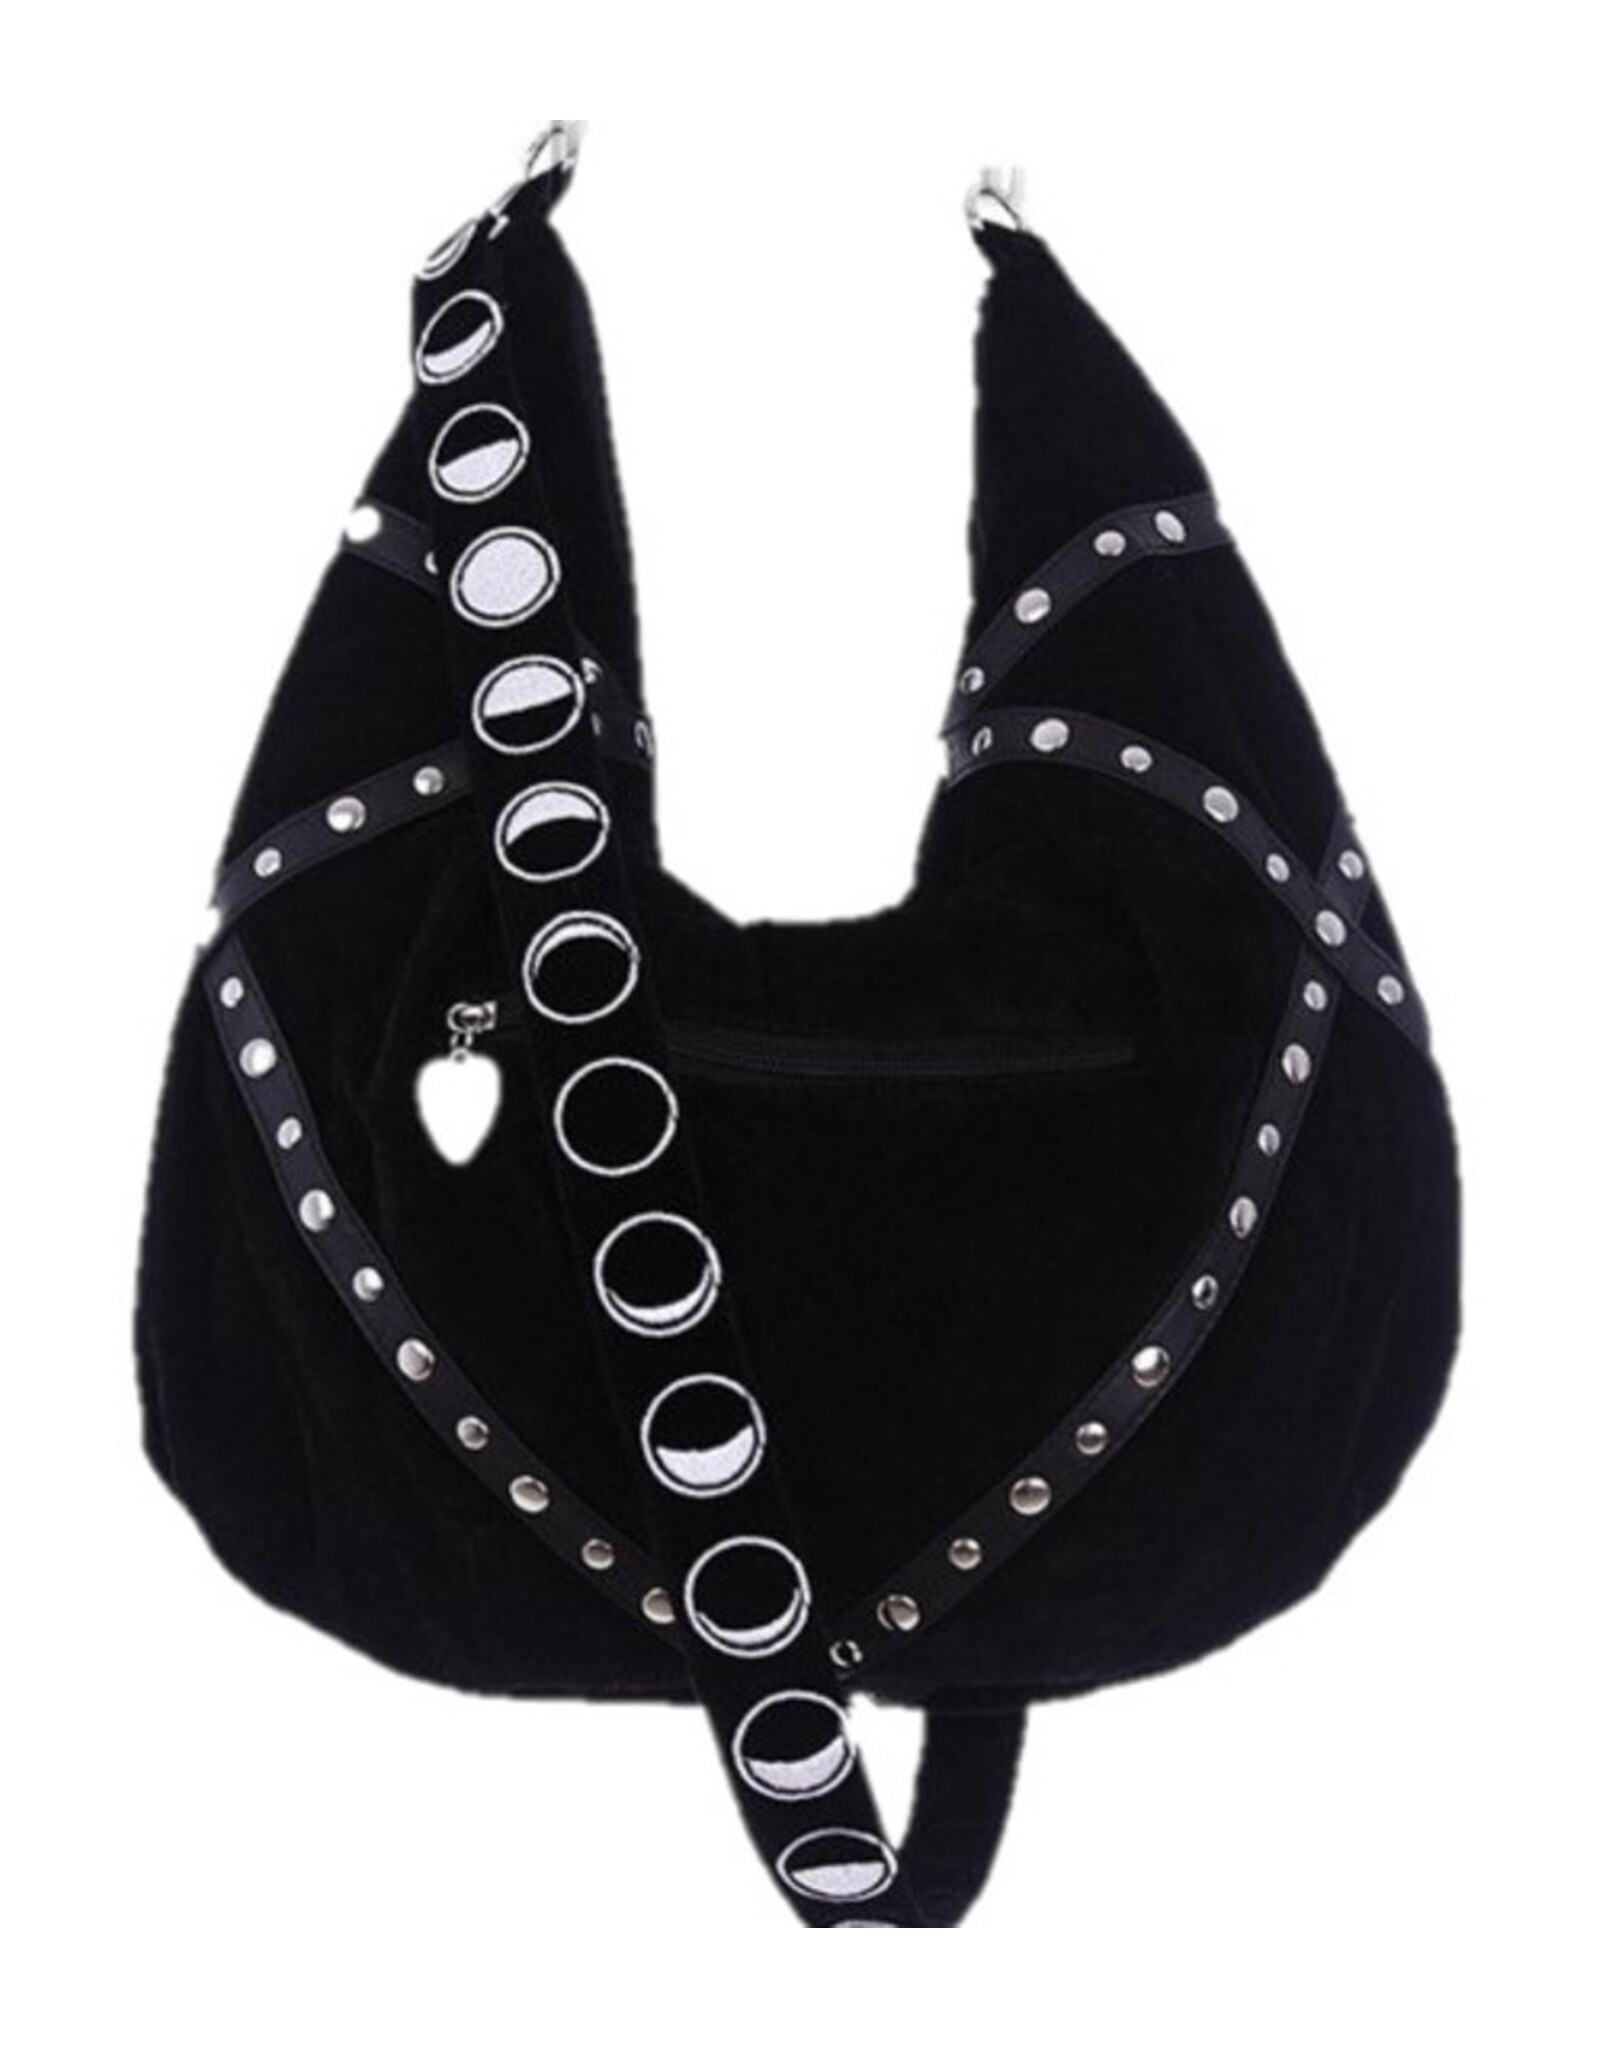 Restyle Gothic bags Steampunk bags - Moon Child Black Velvet Hobo bag with  Moon Phases Embroidery